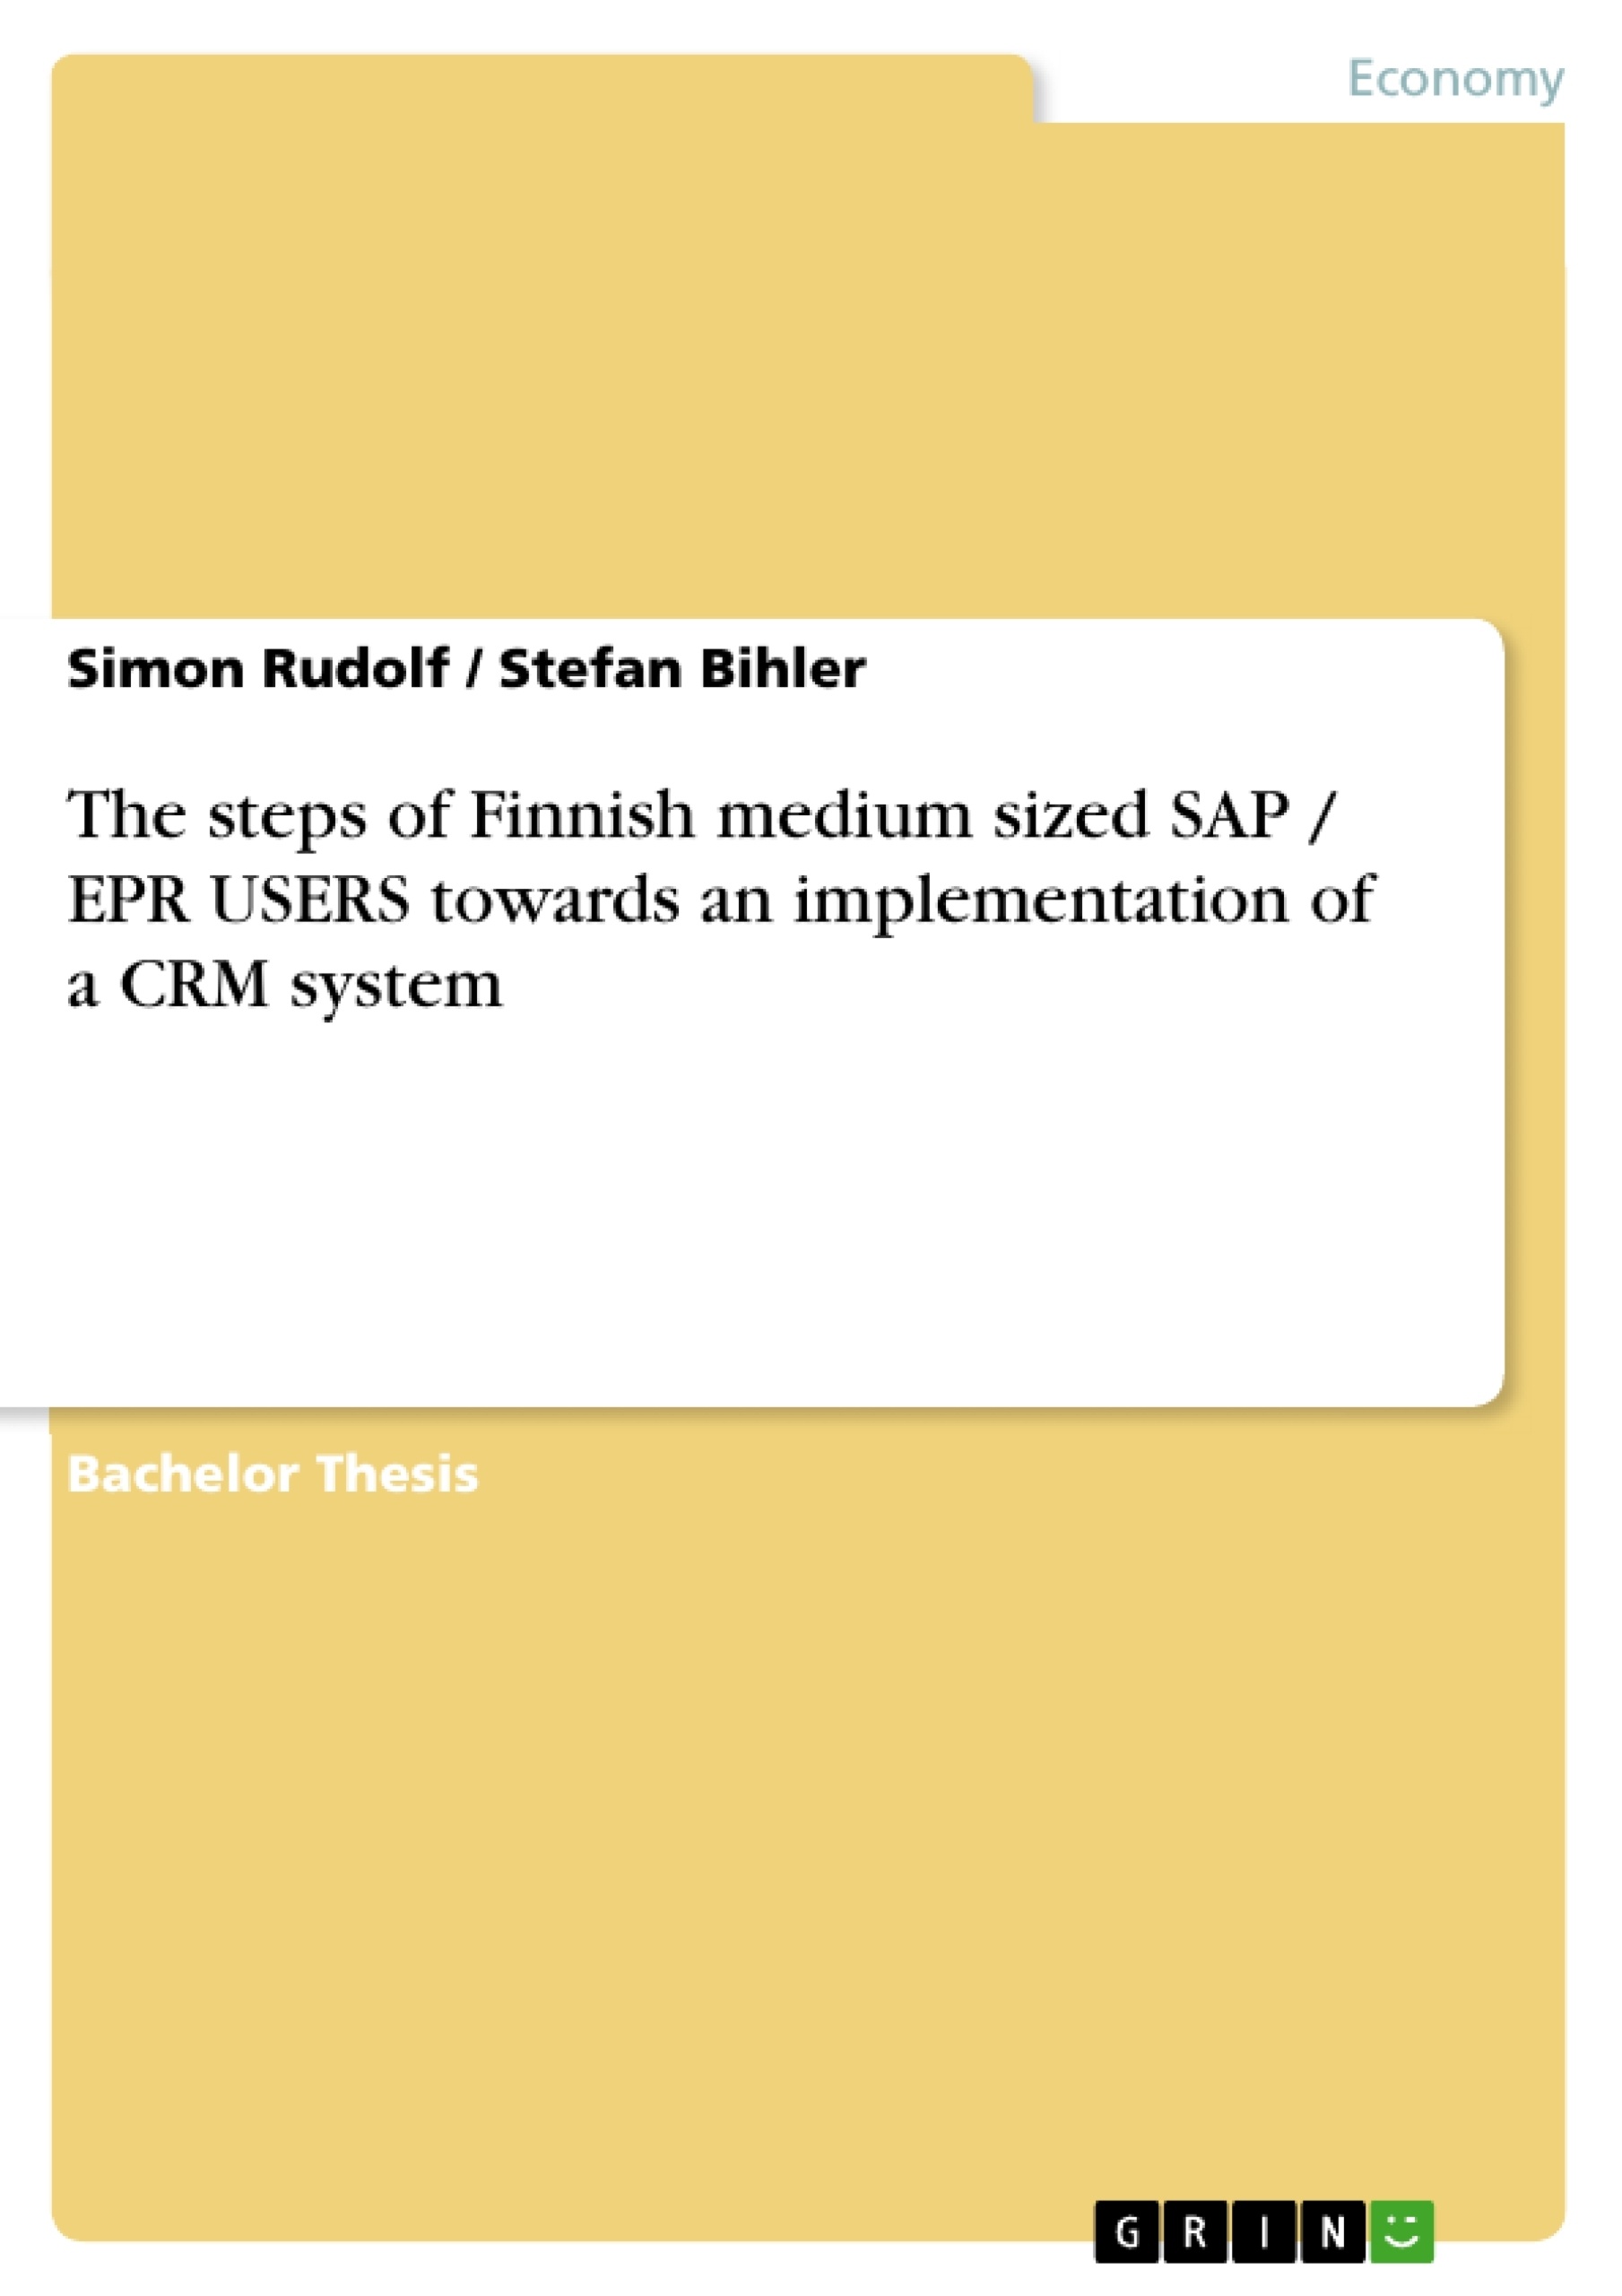 Titre: The steps of Finnish medium sized SAP / EPR USERS towards an implementation of a CRM system 